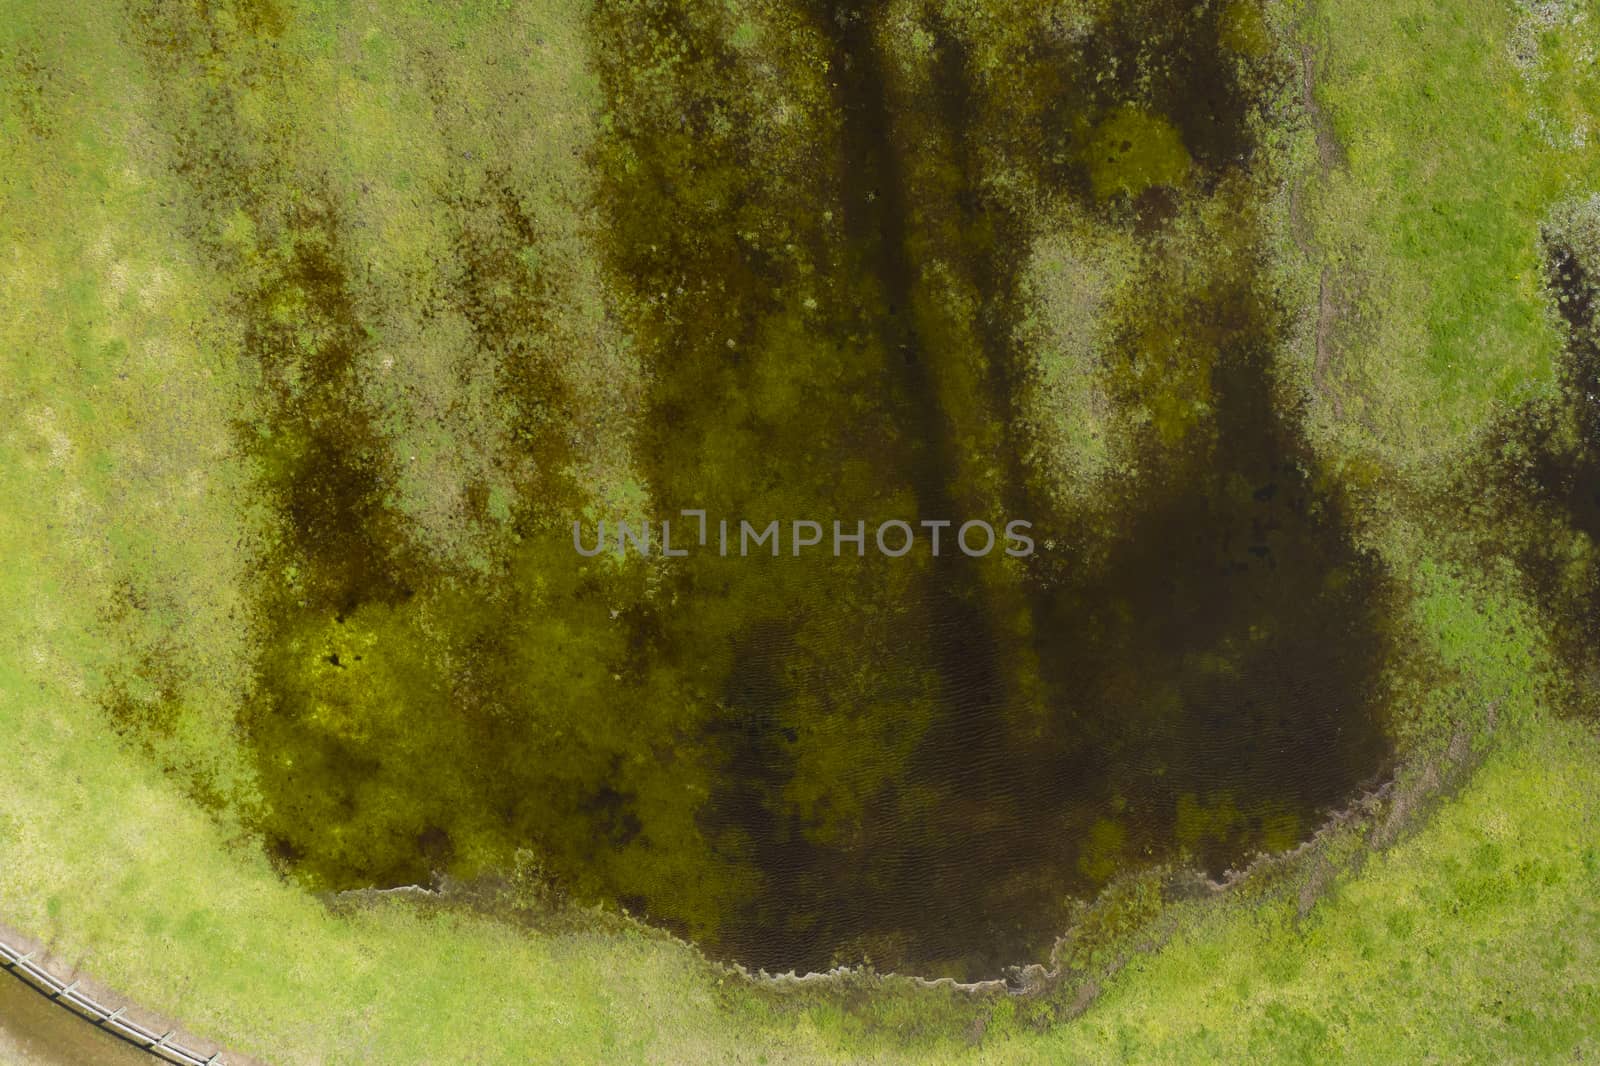 Aerial photograph of flooding in an agricultural field by WittkePhotos